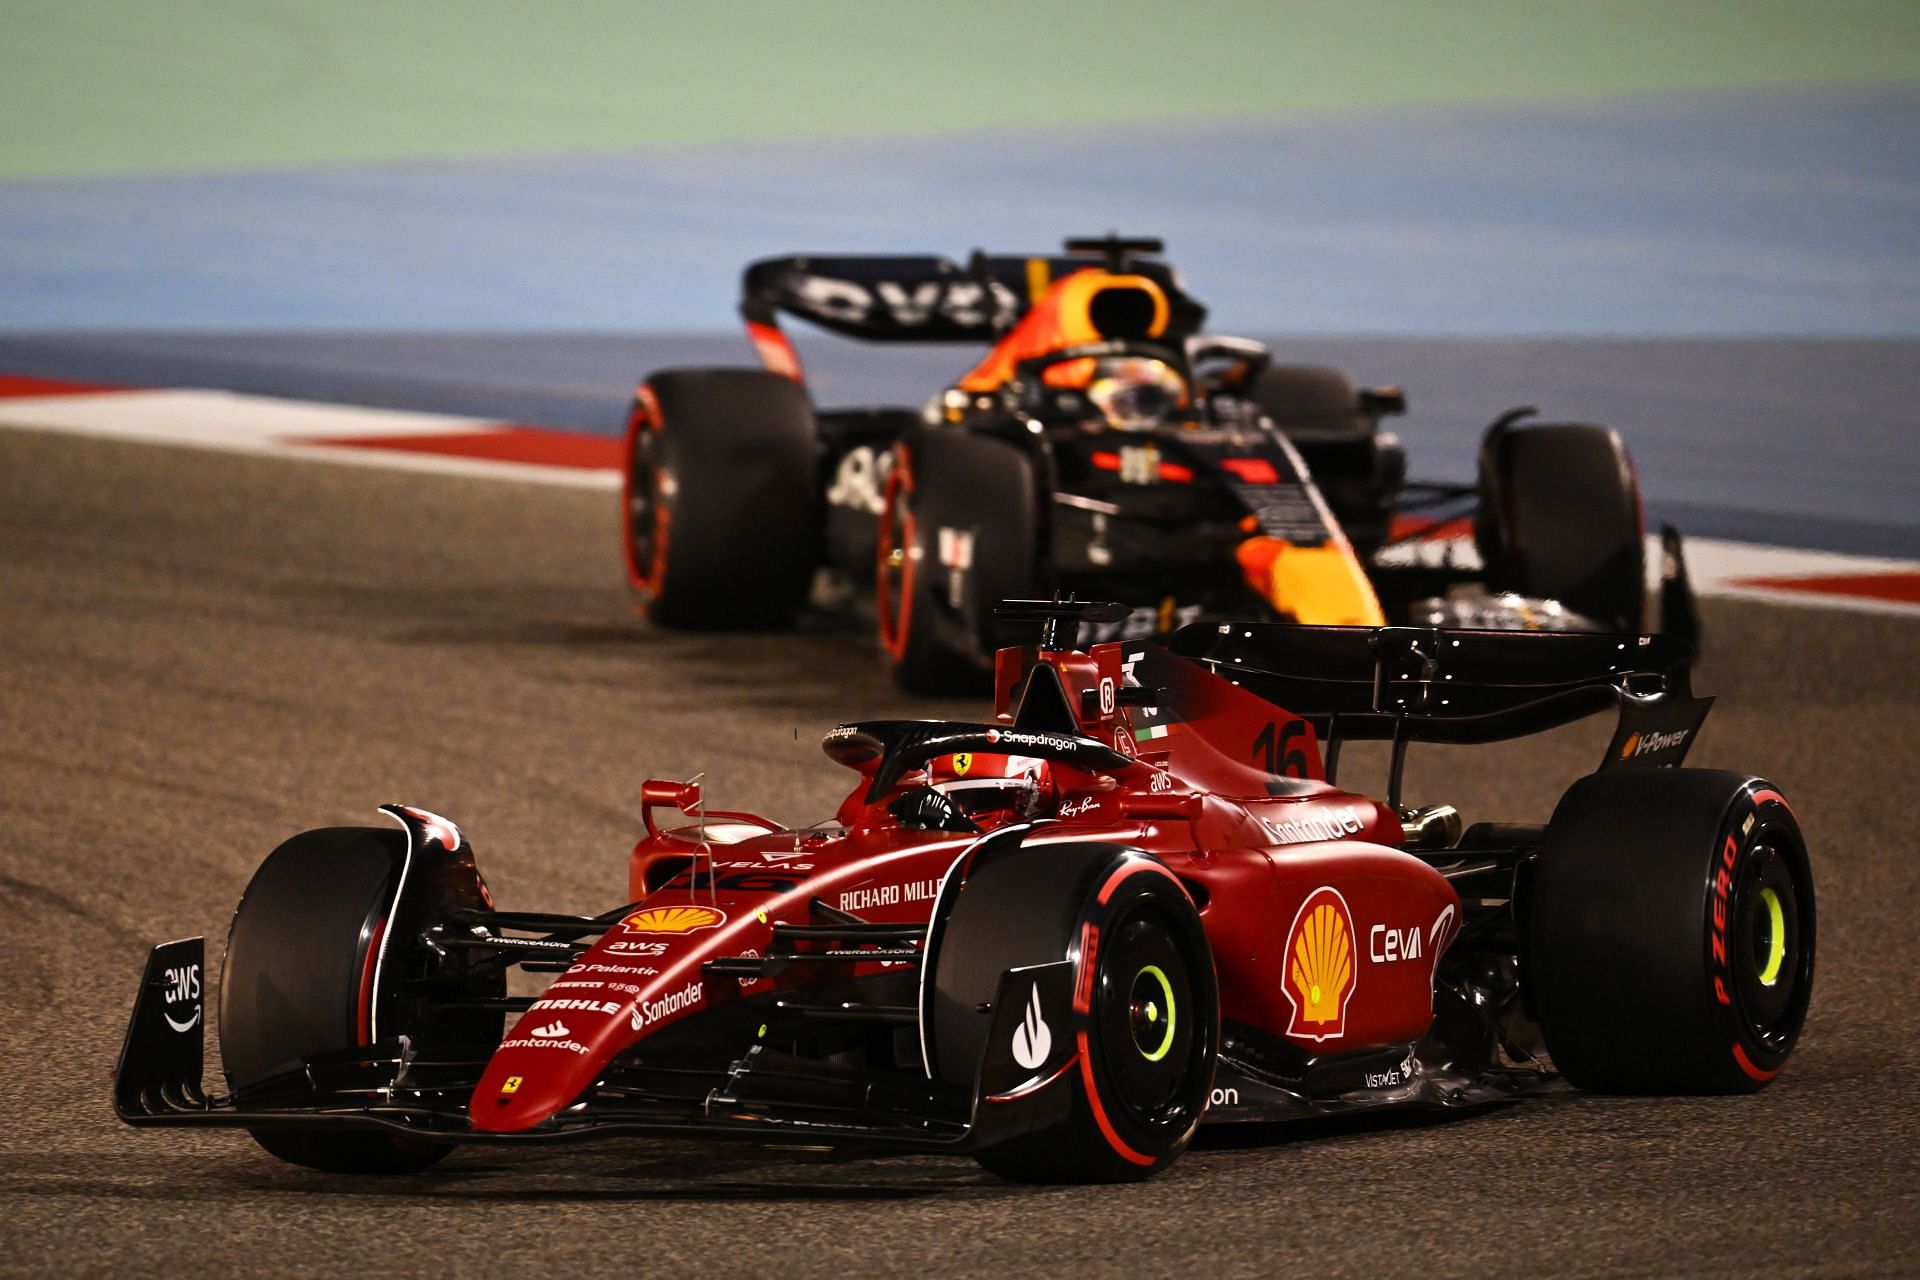 Ferrari&#039;s Charles Leclerc (foreground) tussles with Red Bull&#039;s Max Verstappen (background) during the 2022 F1 Bahrain GP (Photo by Clive Mason/Getty Images)